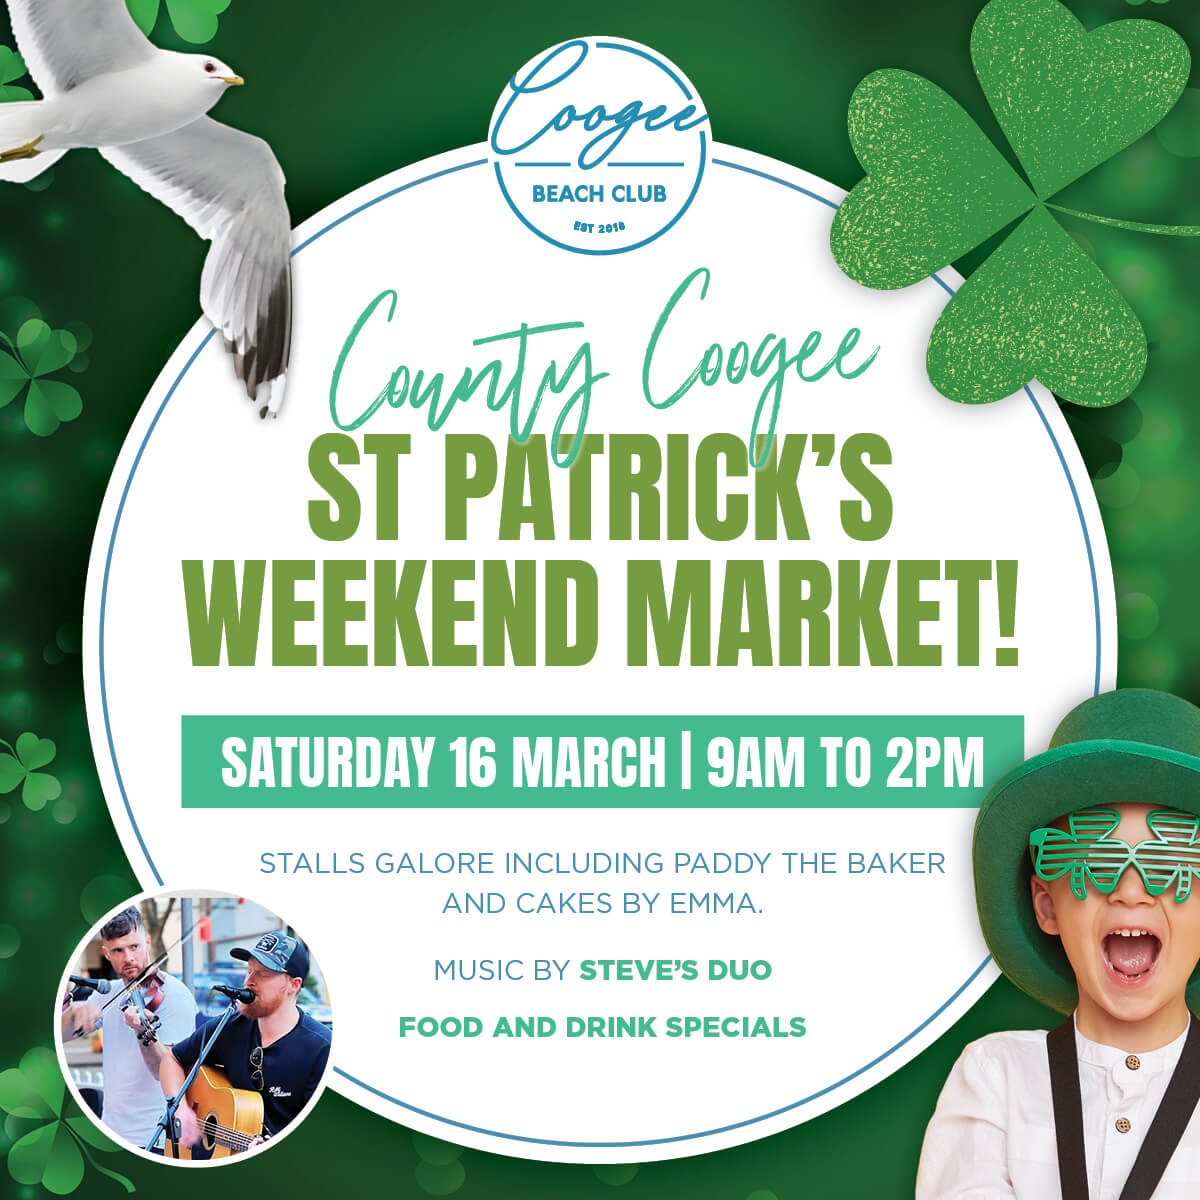 COUNTY COOGEE’ ST PATRICK’S WEEKEND MARKET